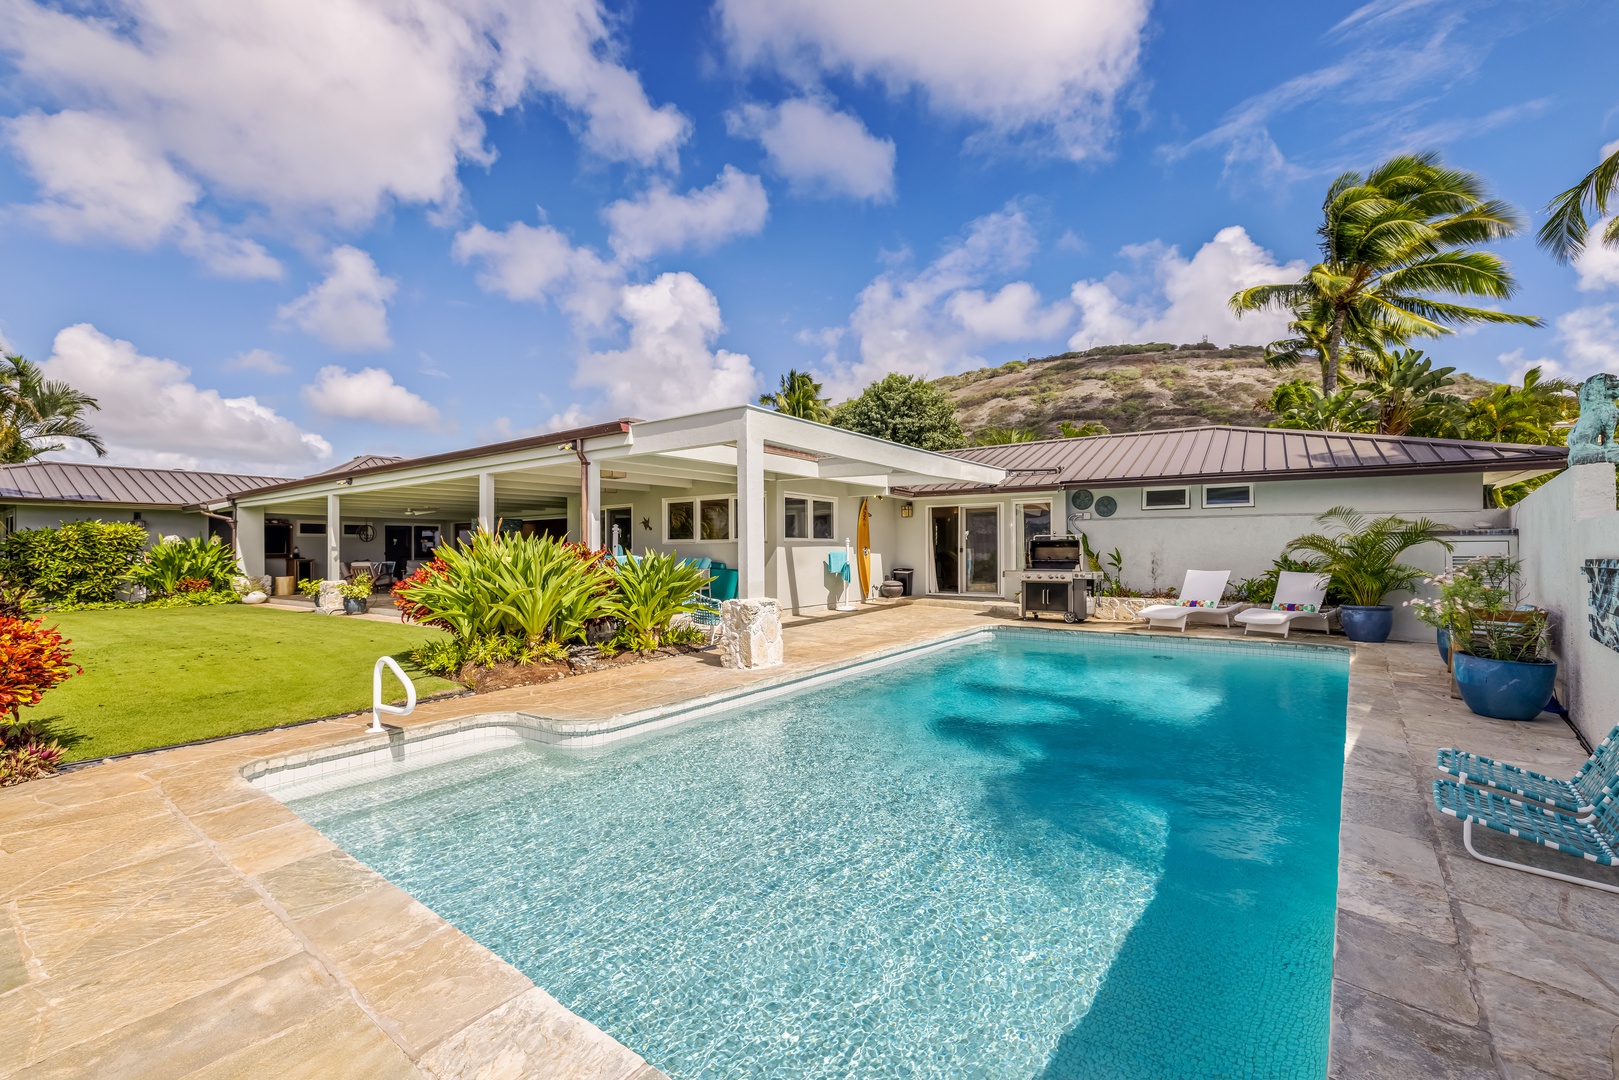 Honolulu Vacation Rentals, Hale Ola - Take a dip in paradise and escape to our luxurious villa in Oahu, complete with a stunning pool and breathtaking views